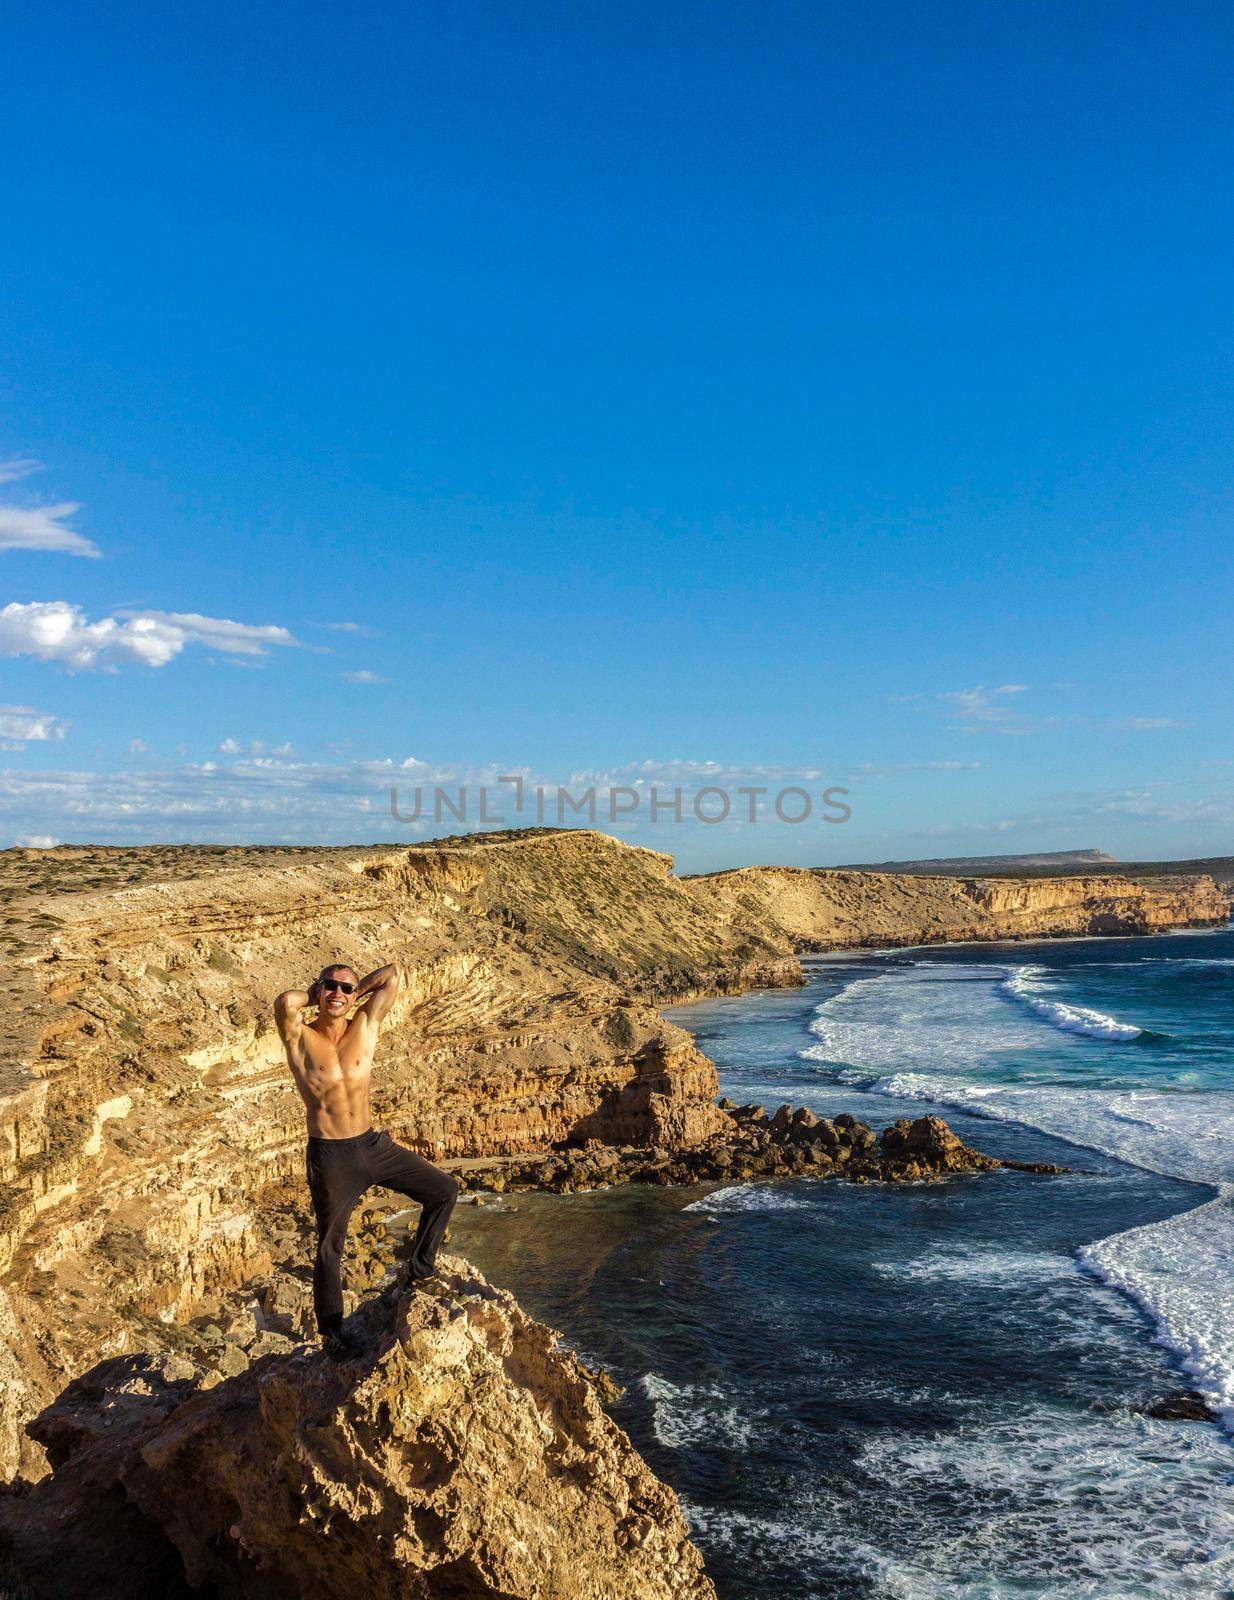 jung man standing on cliffs near port lincon at sunset, South Australia by bettercallcurry